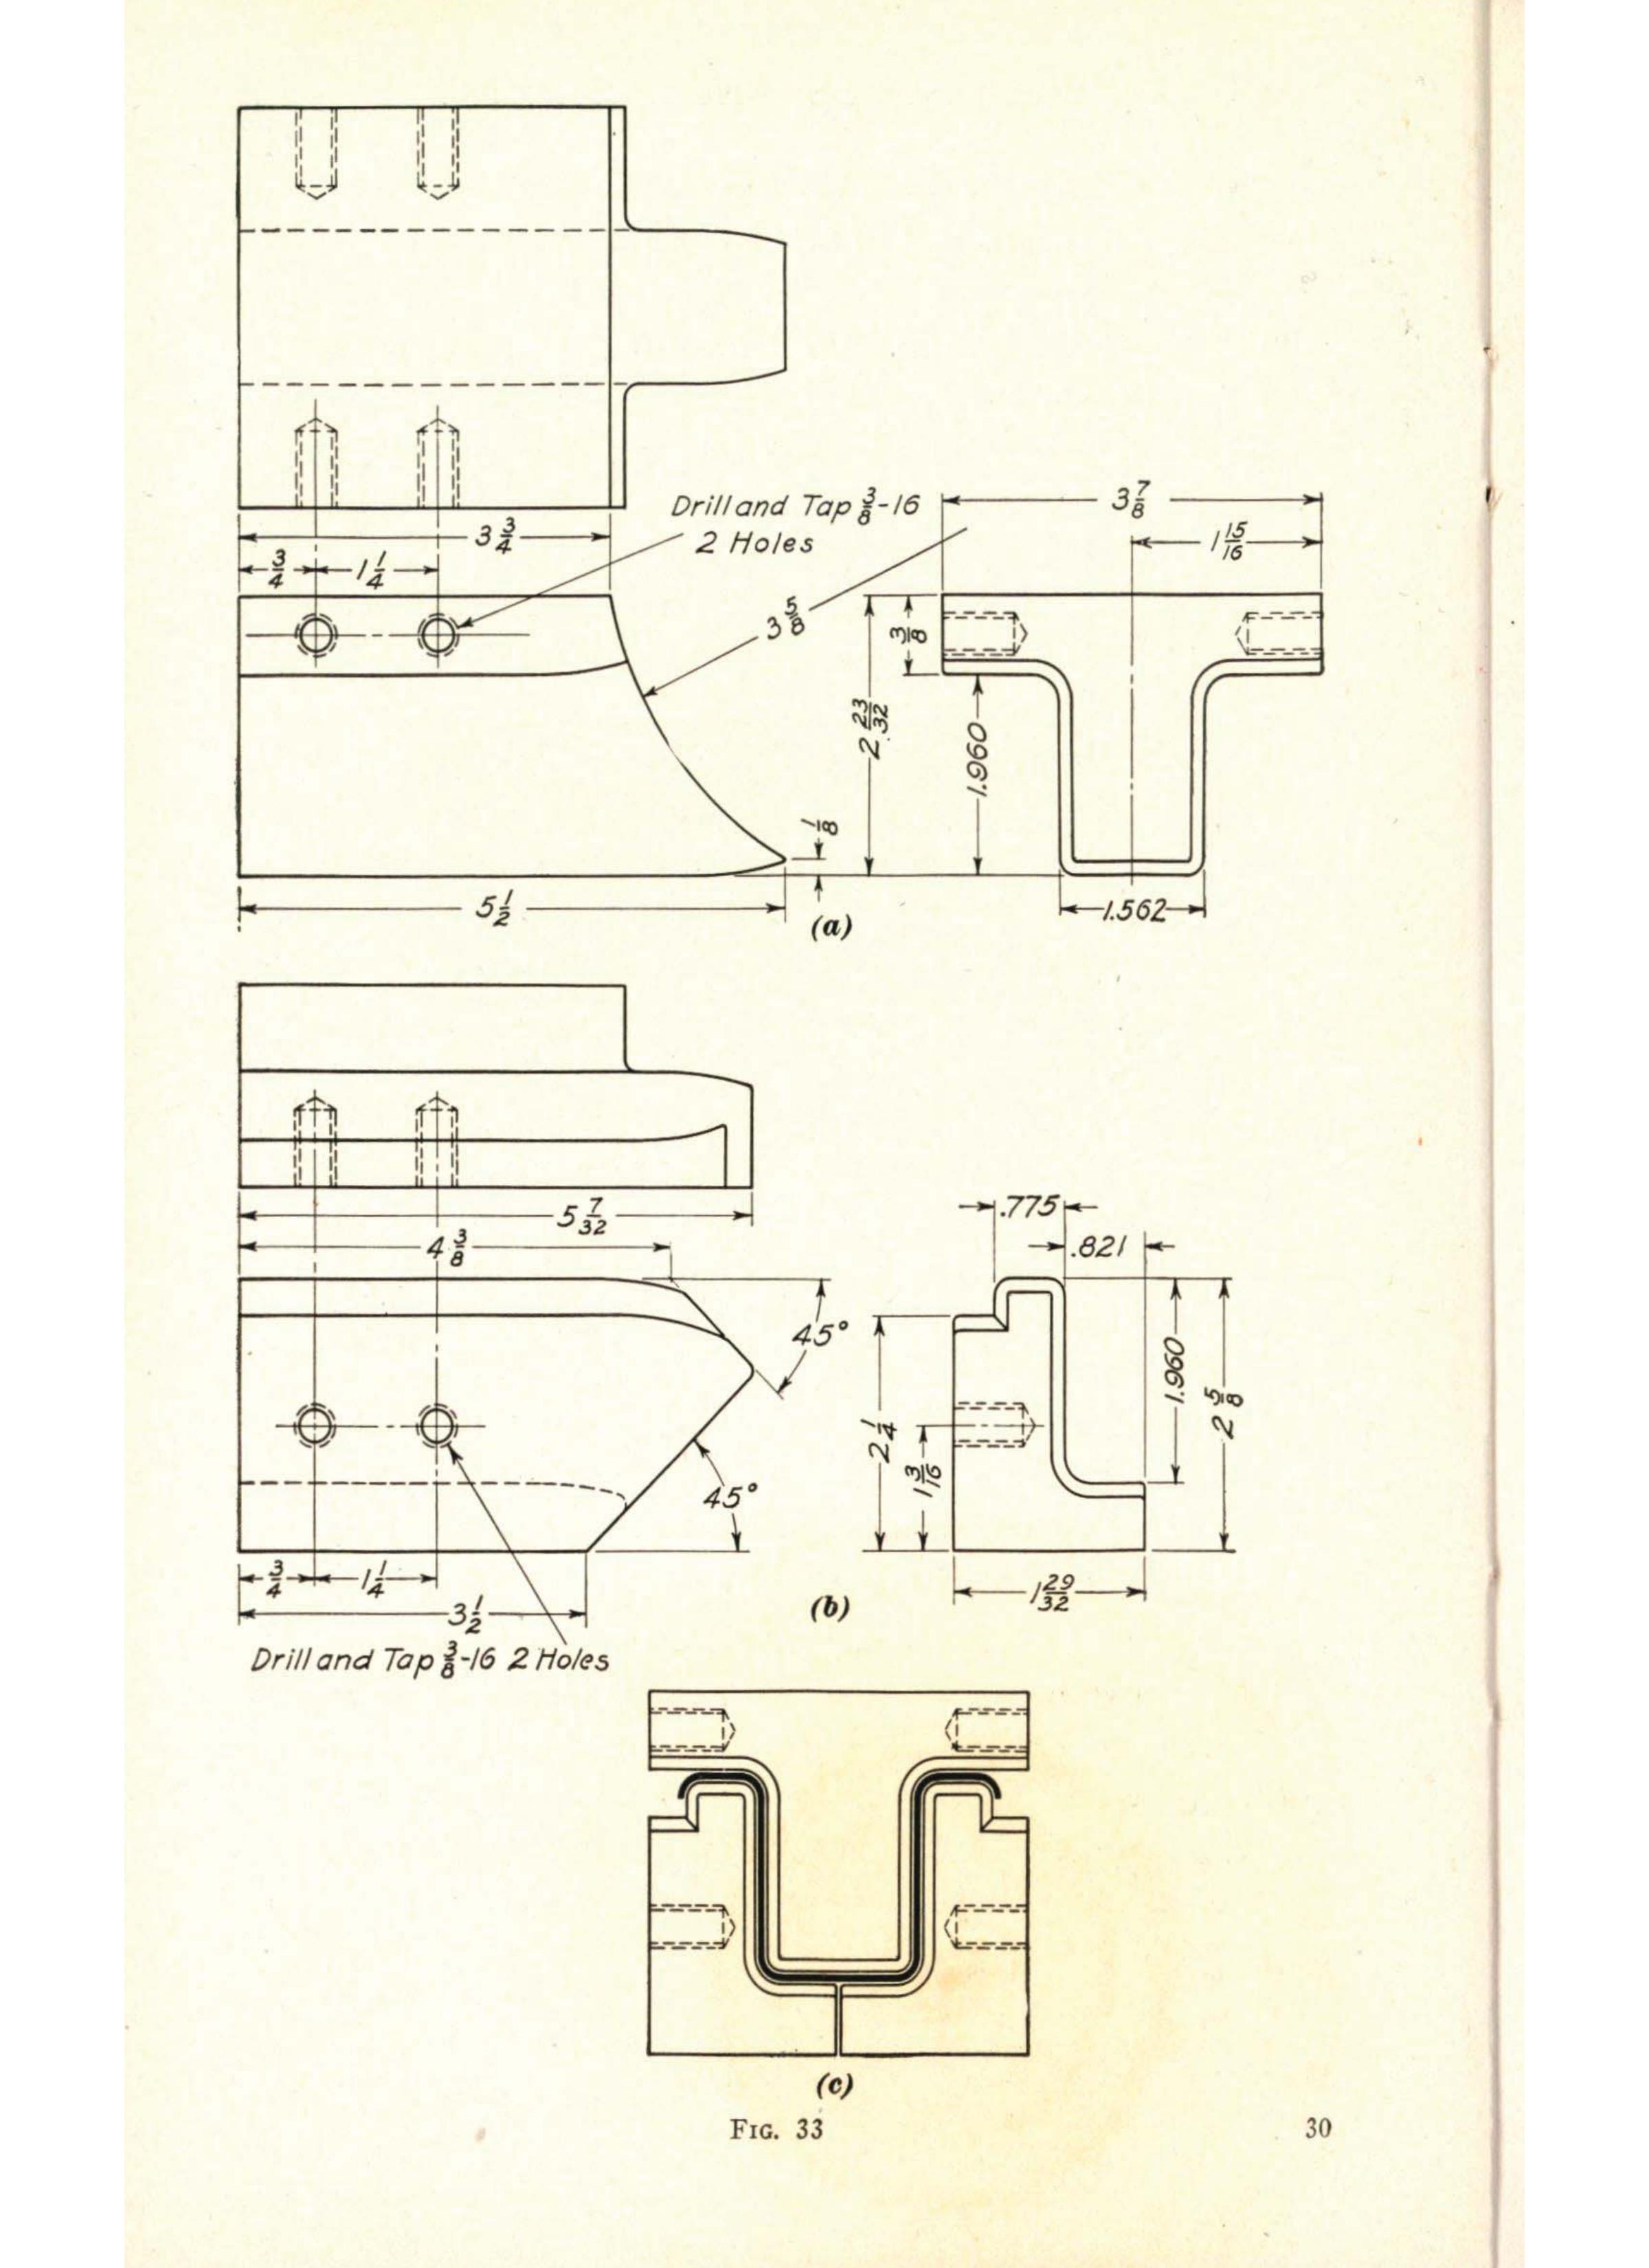 Sample page 32 from AirCorps Library document: Forming Methods - Draw Bench, Power Rolls, Spinning - Bureau of Aeronautics